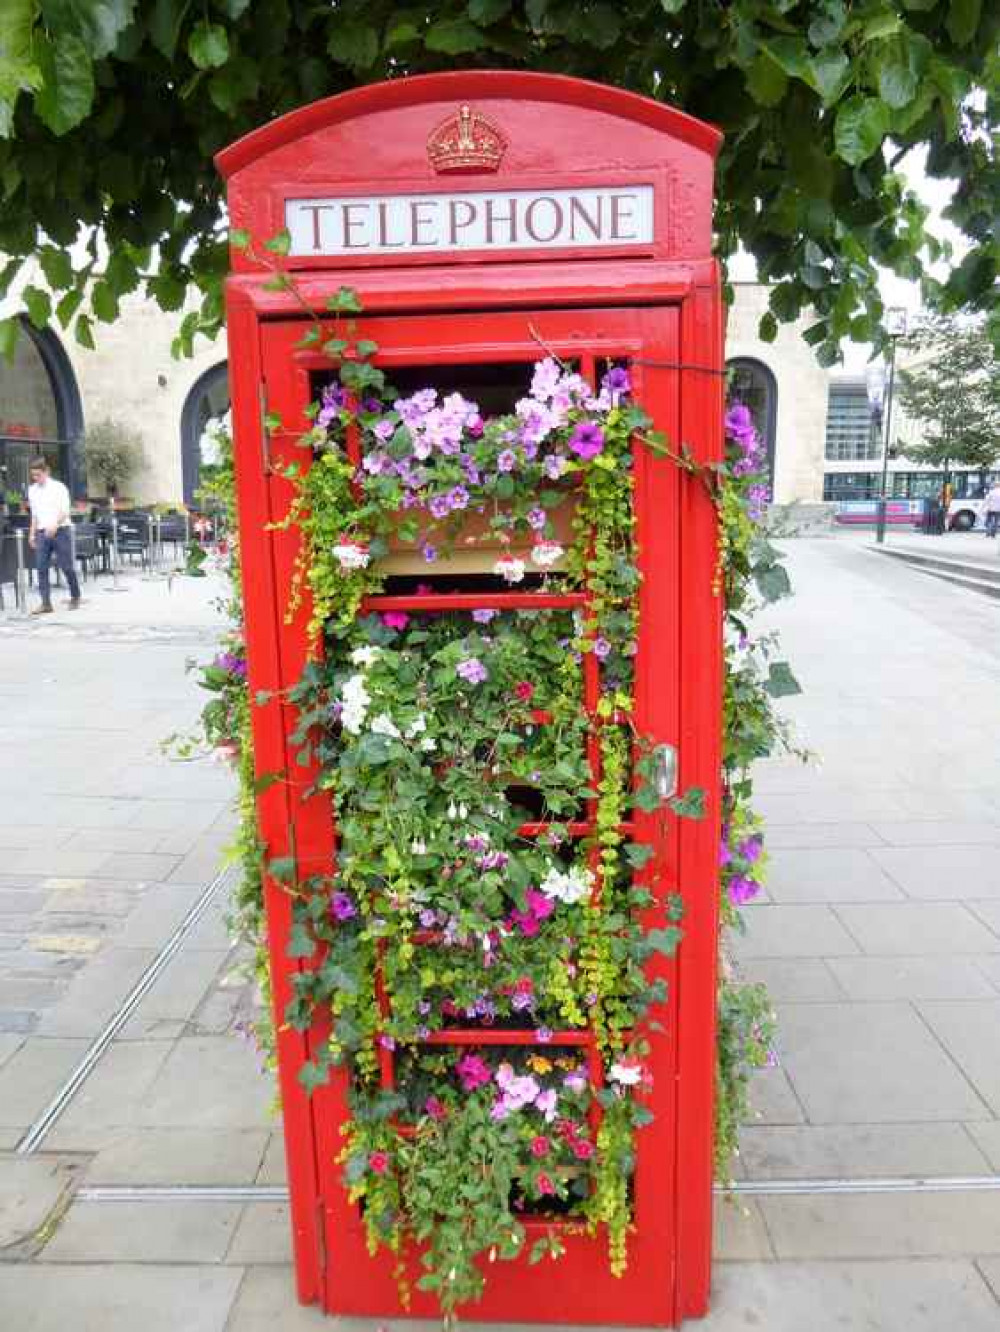 An example of how a traditional red telephone box has been used as a planter